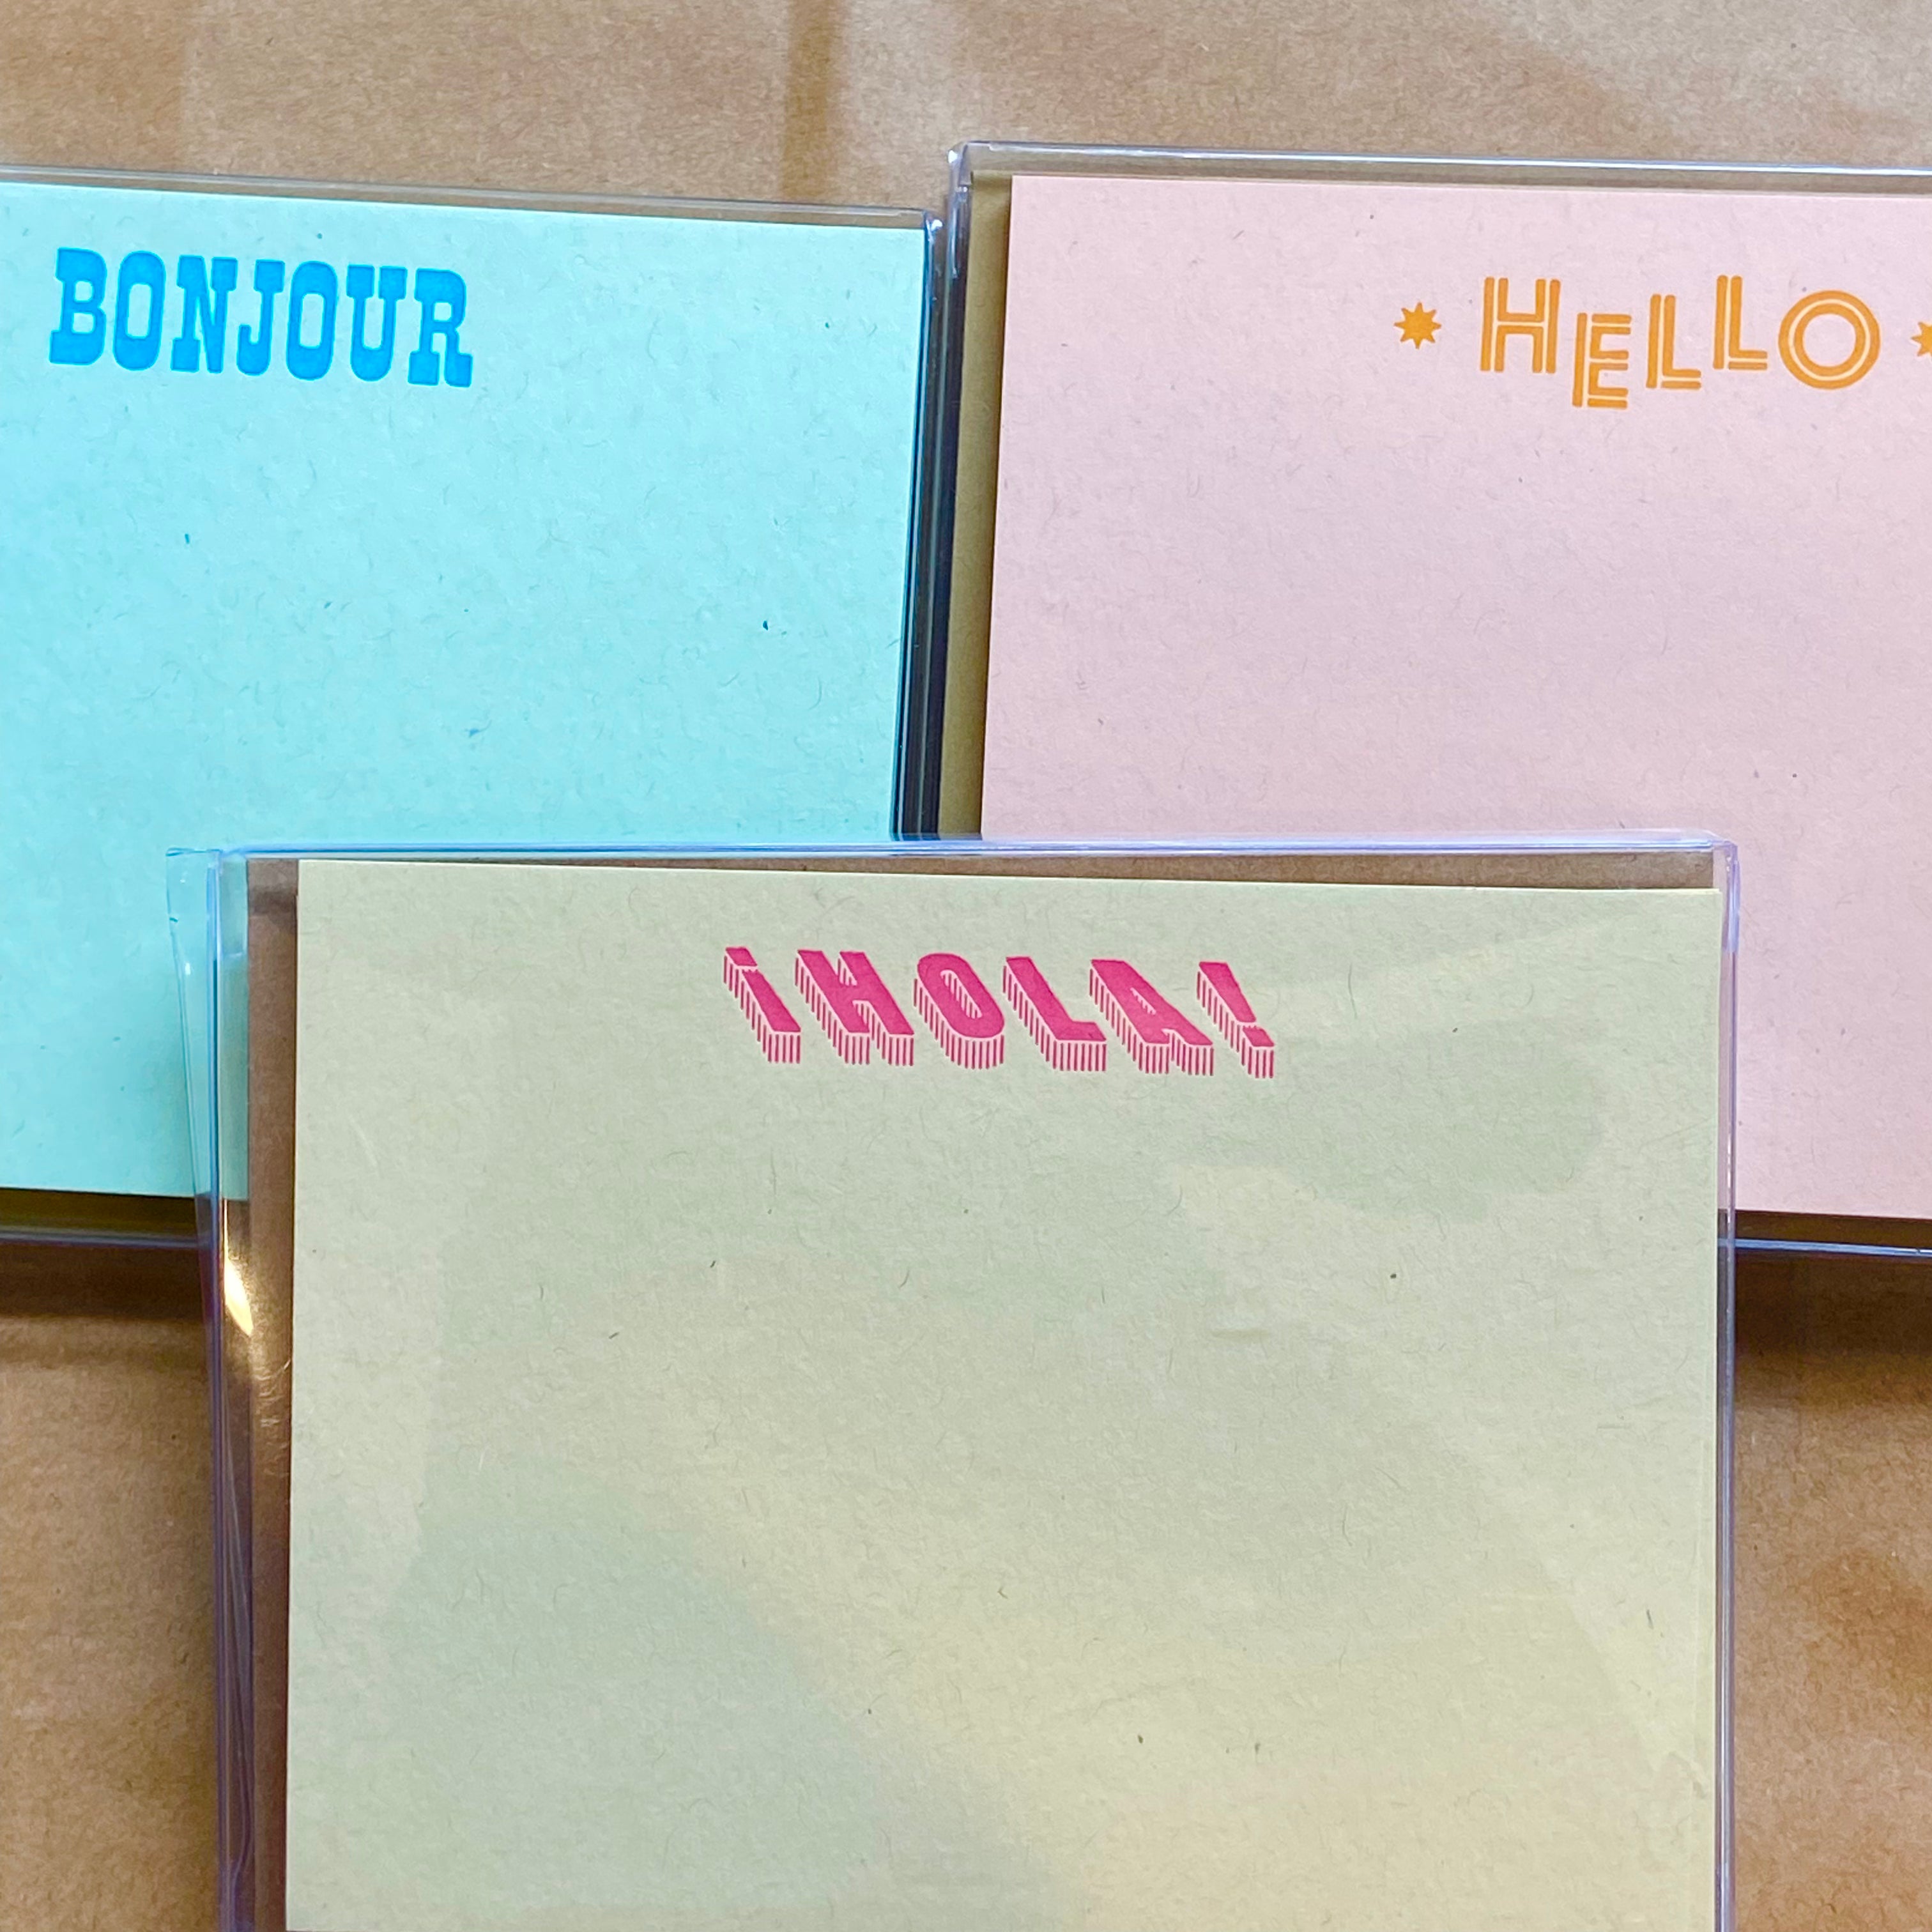 Hello- Boxed Set of Greeting Cards